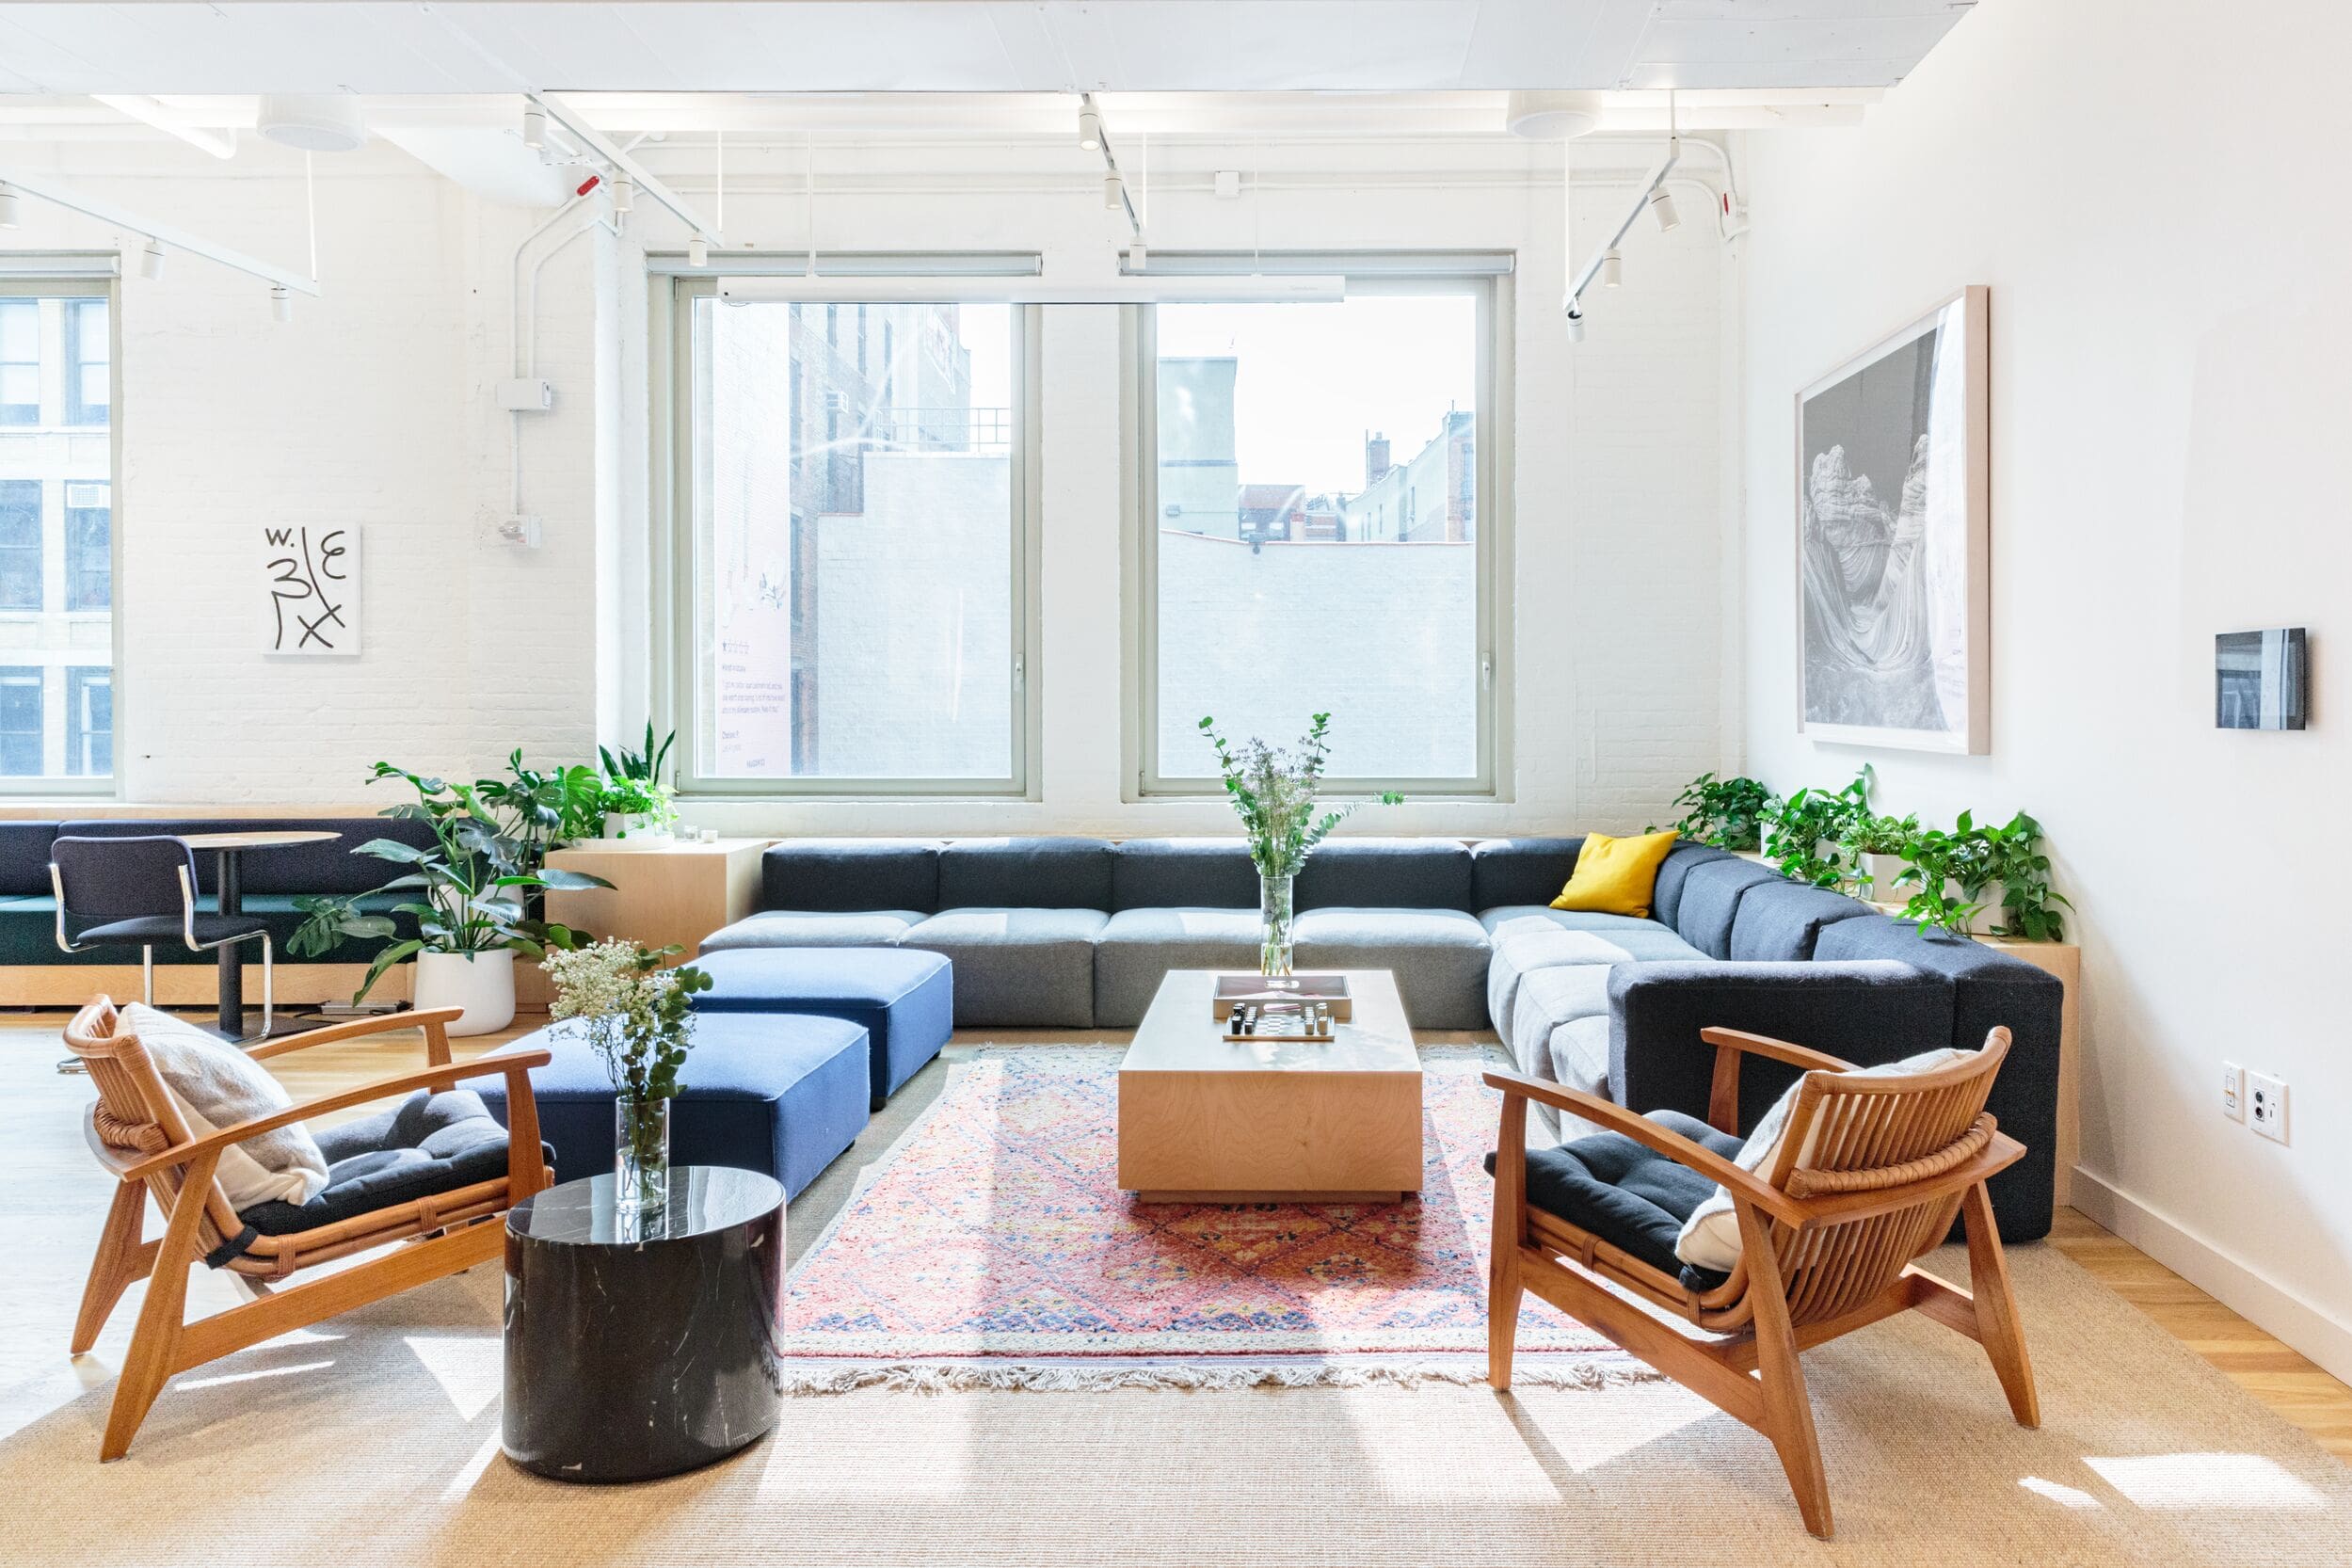 WeWork SoHo Coworking Space in New York City, USA